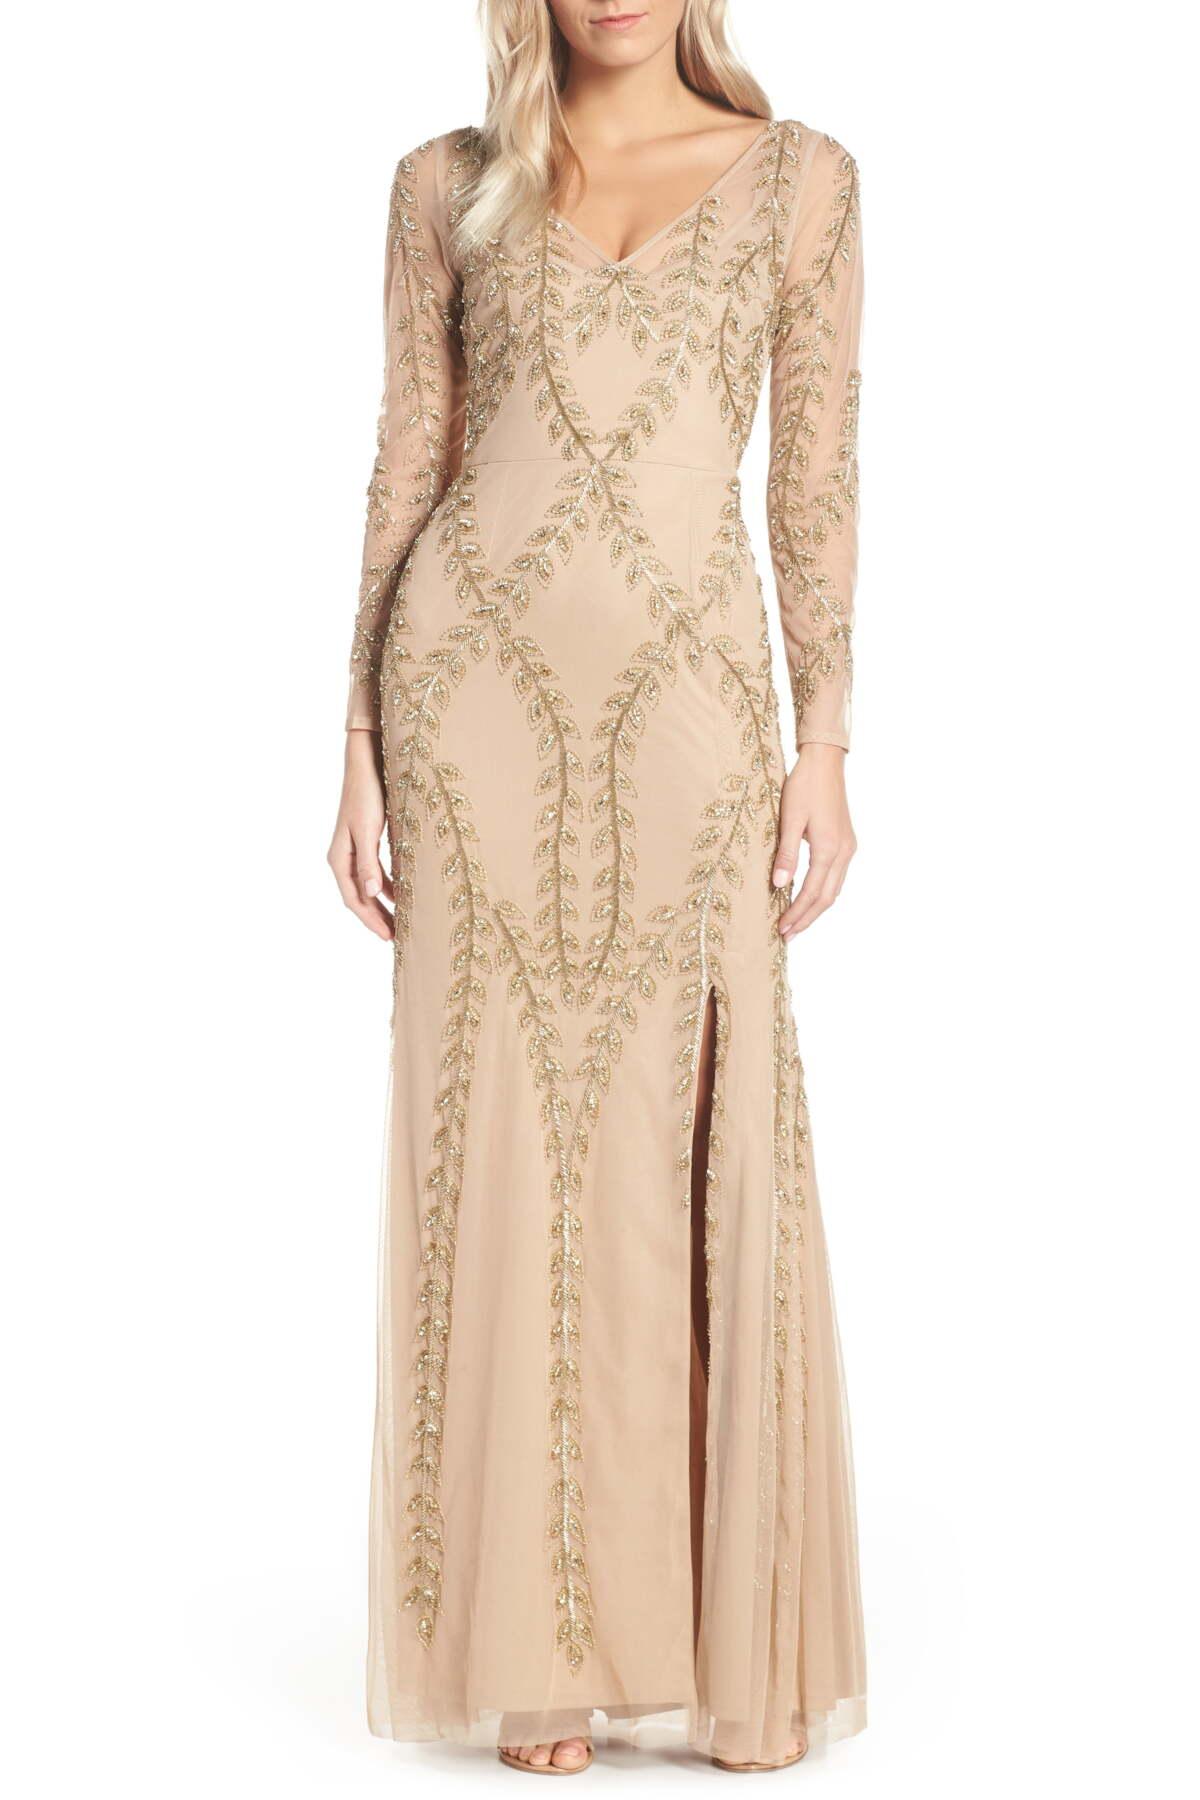 Adrianna Papell V-neck Beaded Long Sleeve Side Slit Gown in Champagne Gold  (Metallic) - Lyst